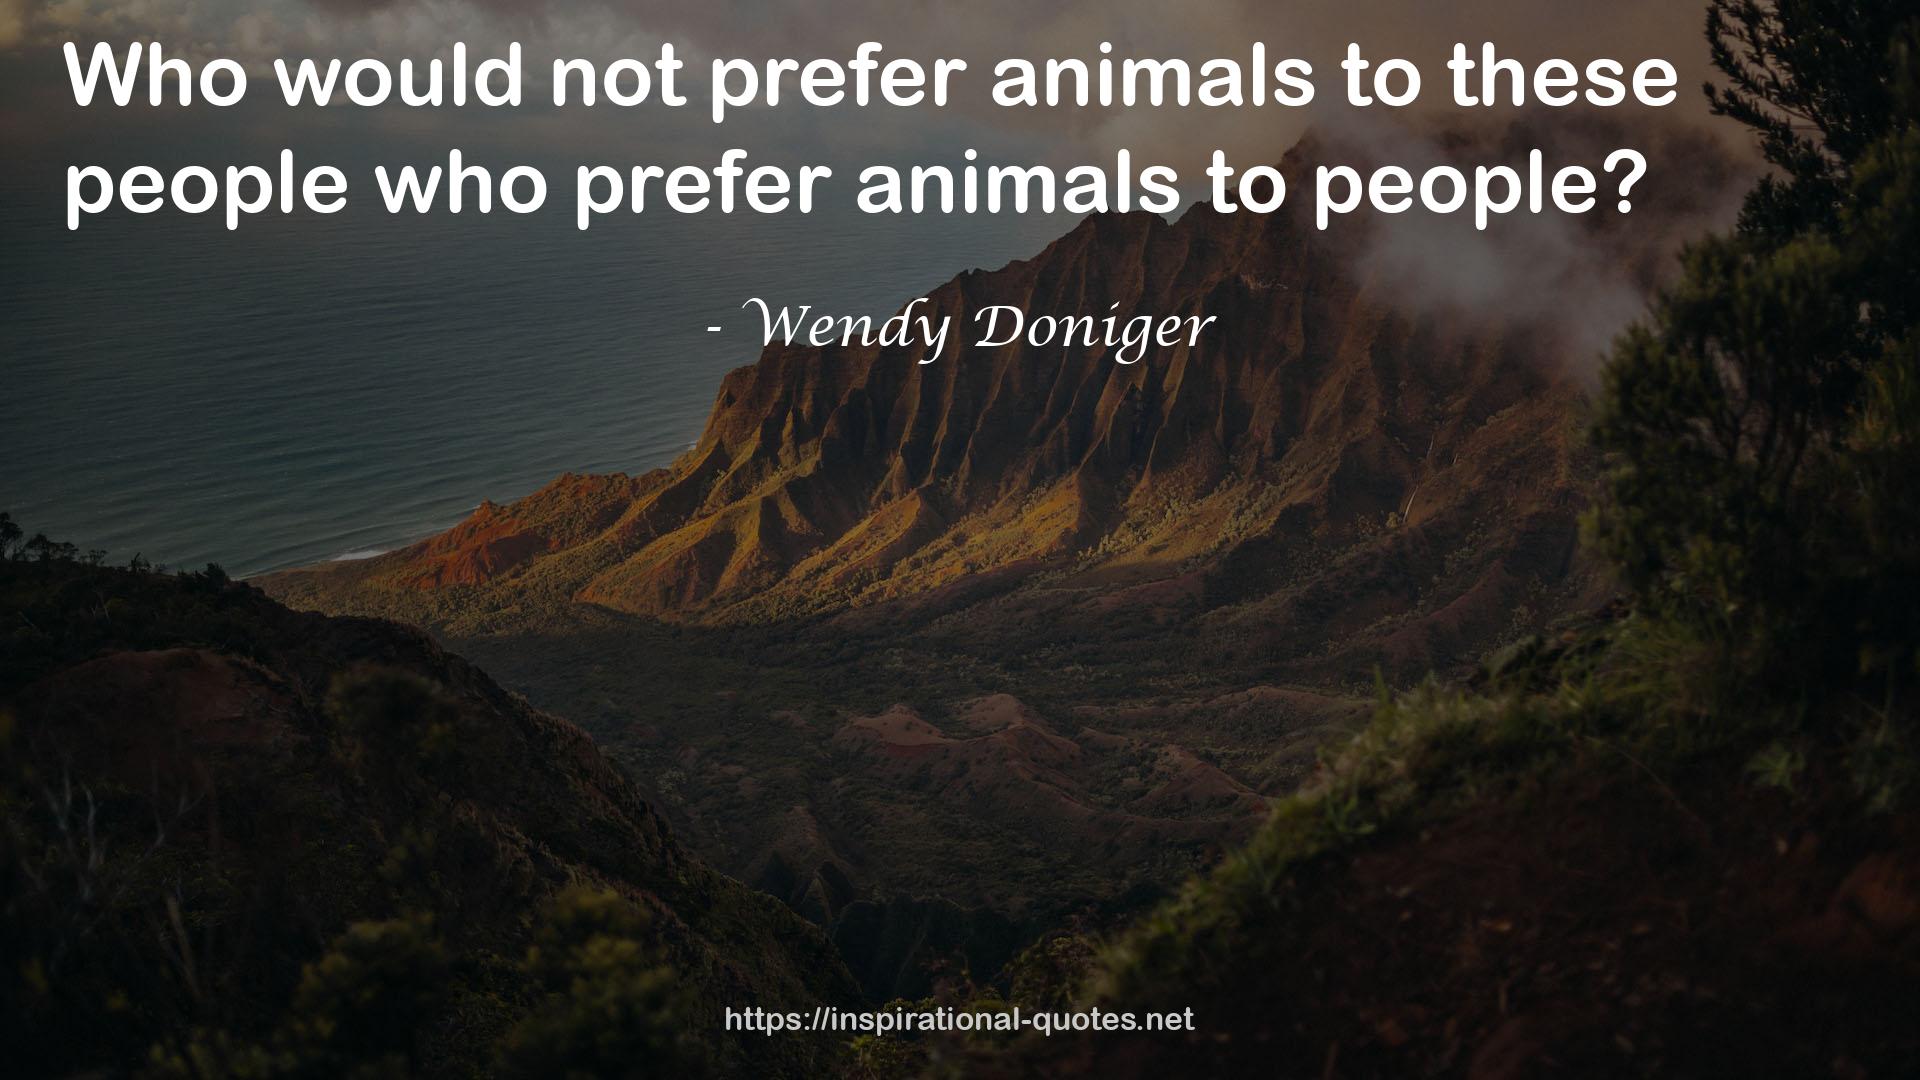 Wendy Doniger QUOTES